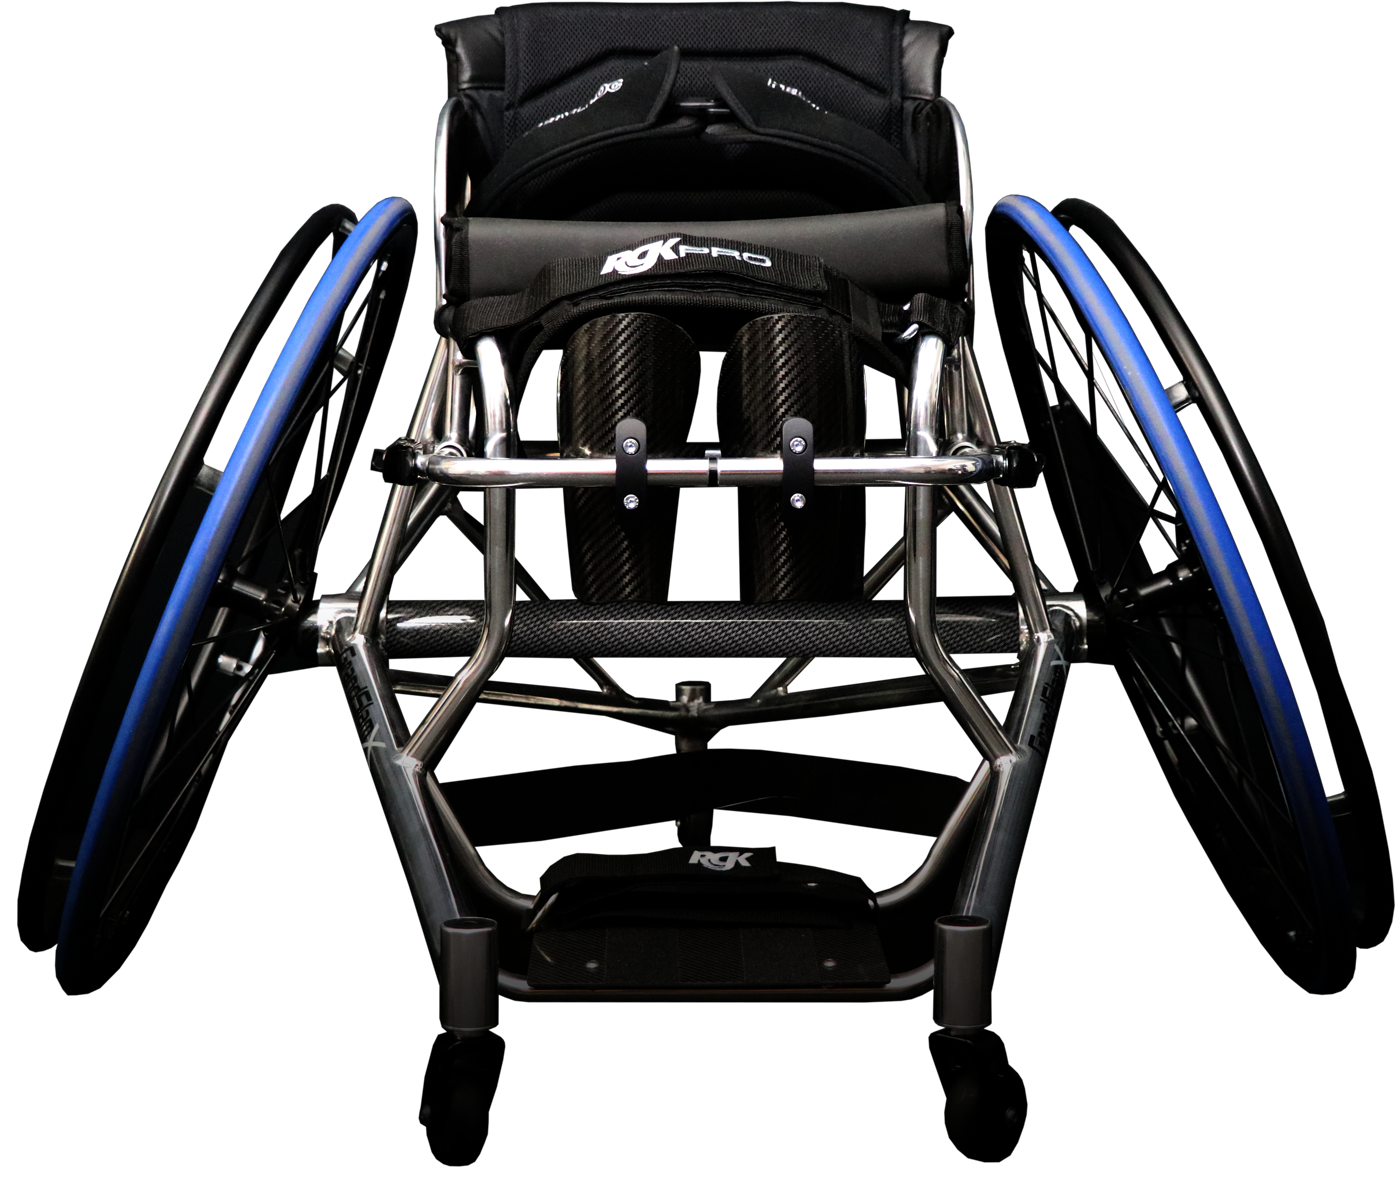 Front angle of tennis wheelchair by RGK